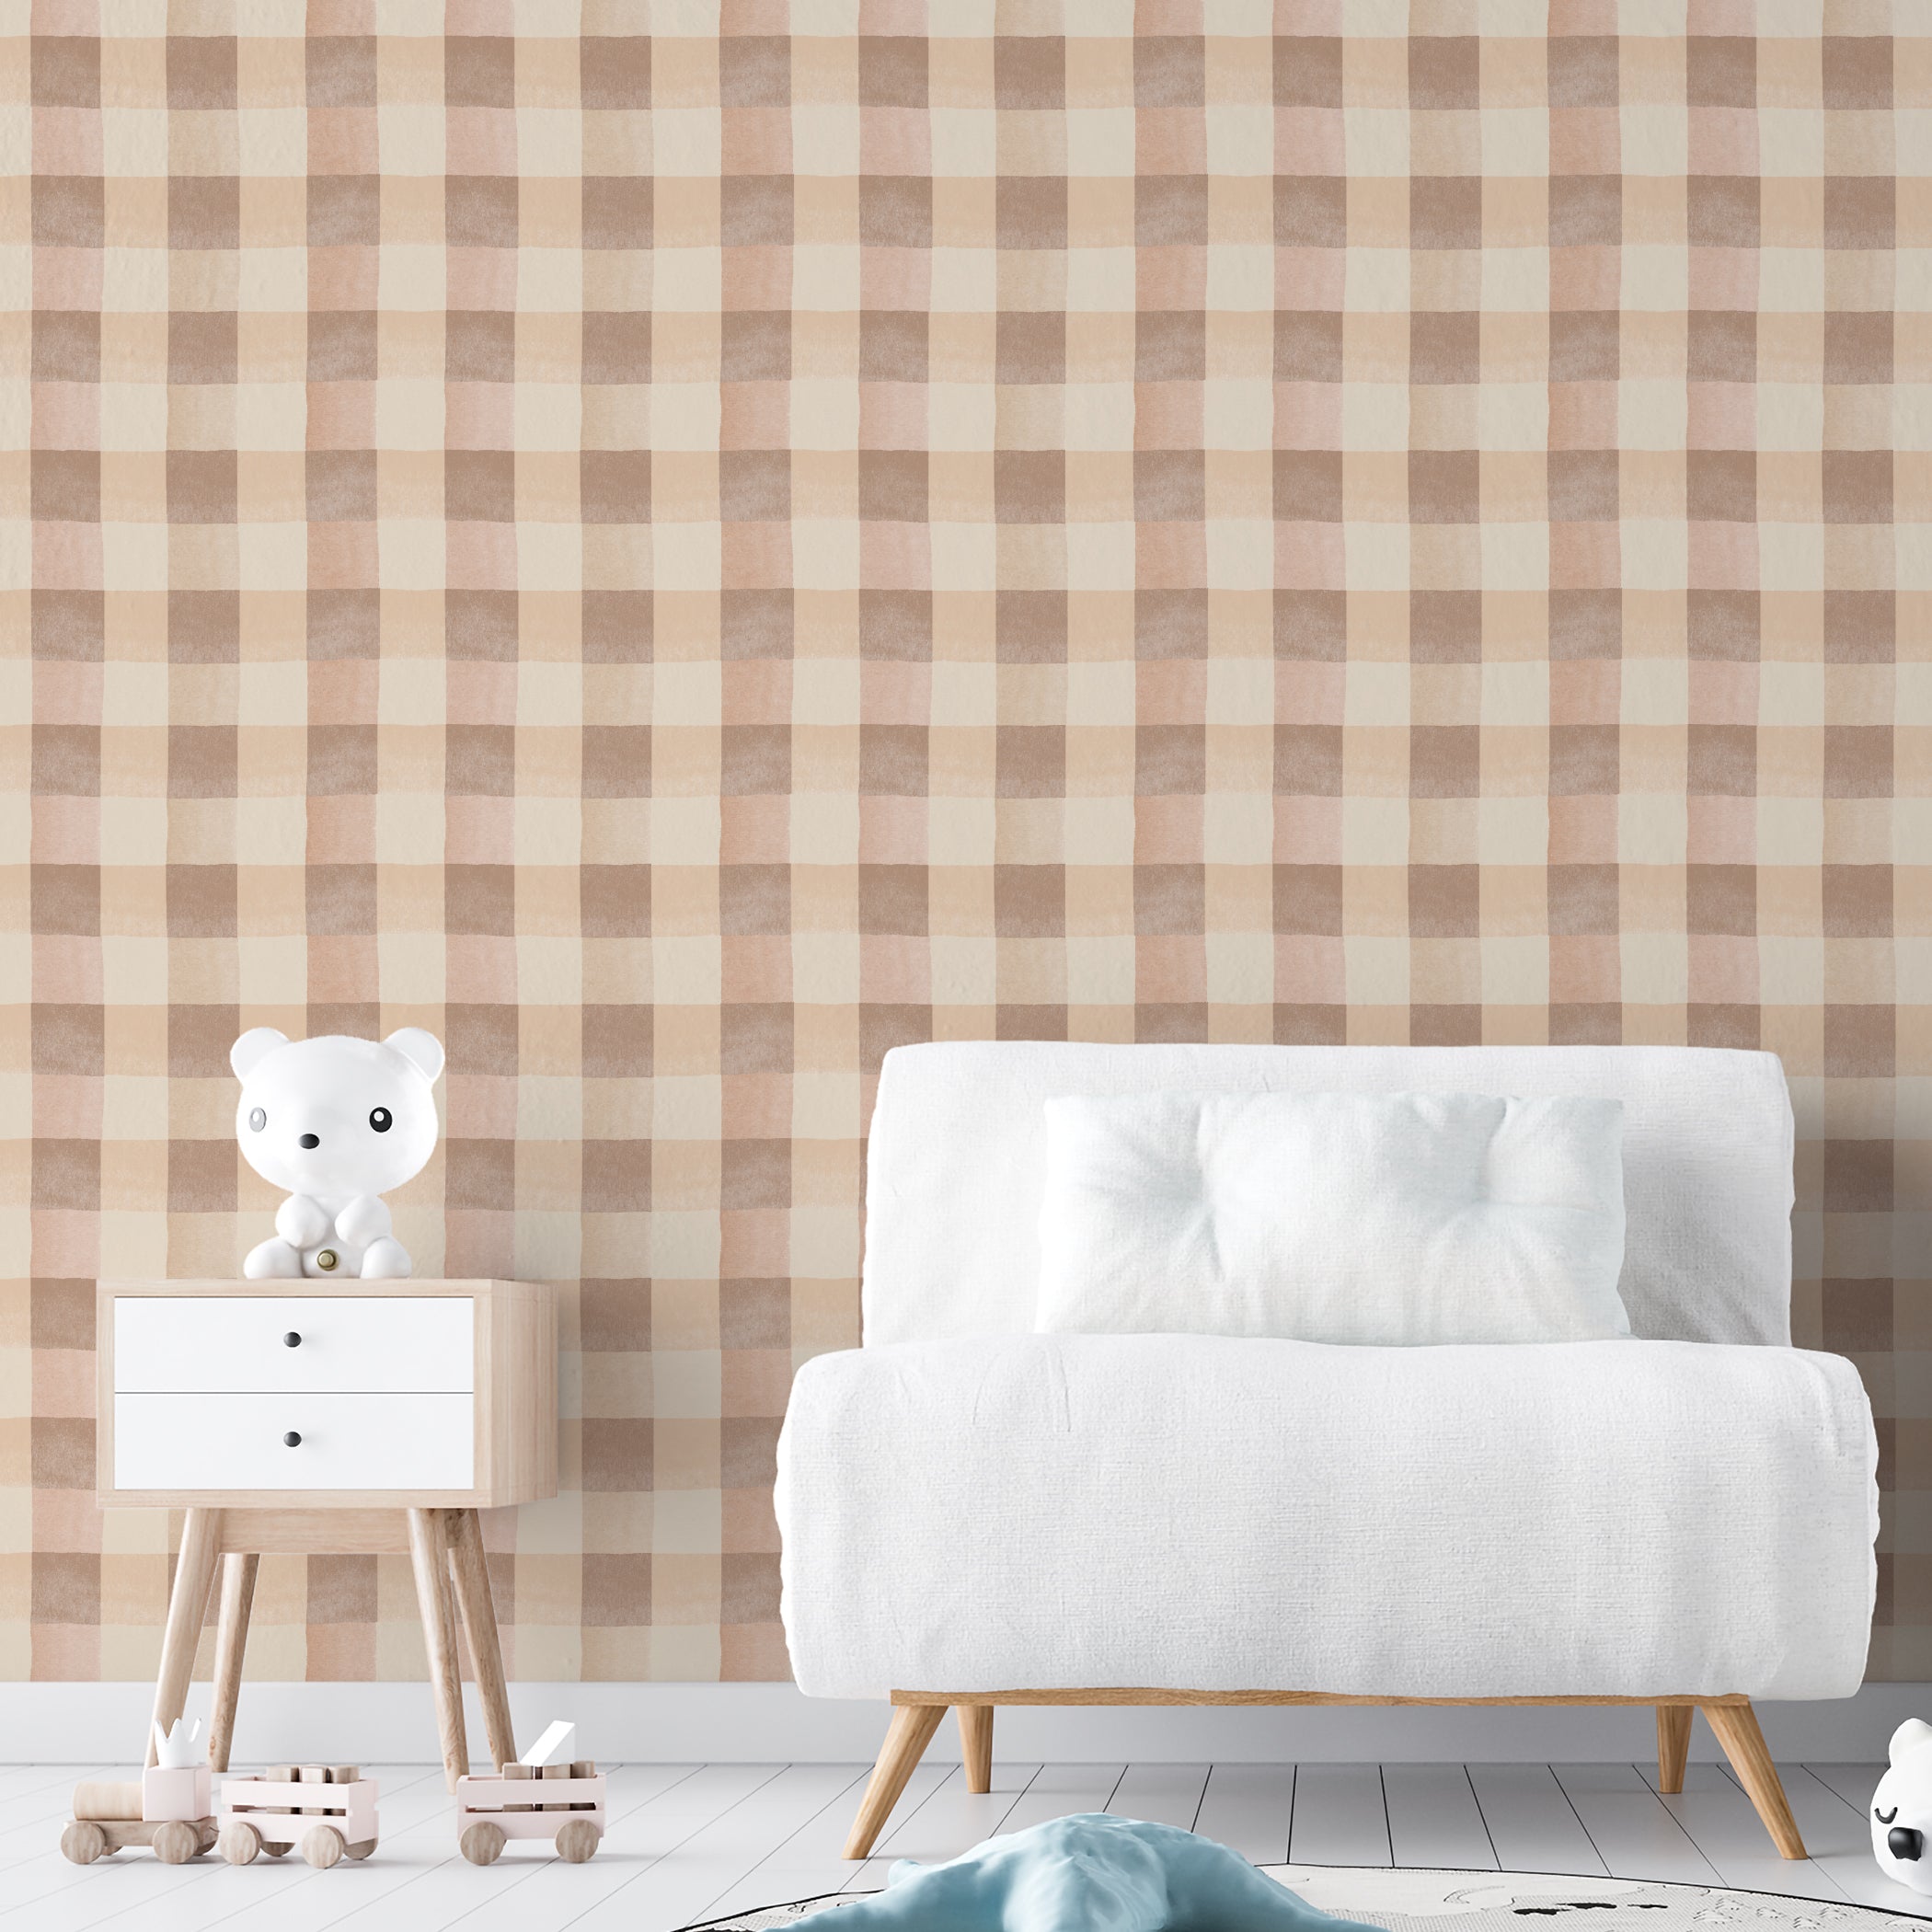 A contemporary room setting featuring Camille Wallpaper with a checkered pattern in pastel beige and cream. The room includes a modern white sofa and a wooden table with a cute white bear figurine, creating a calm and inviting atmosphere